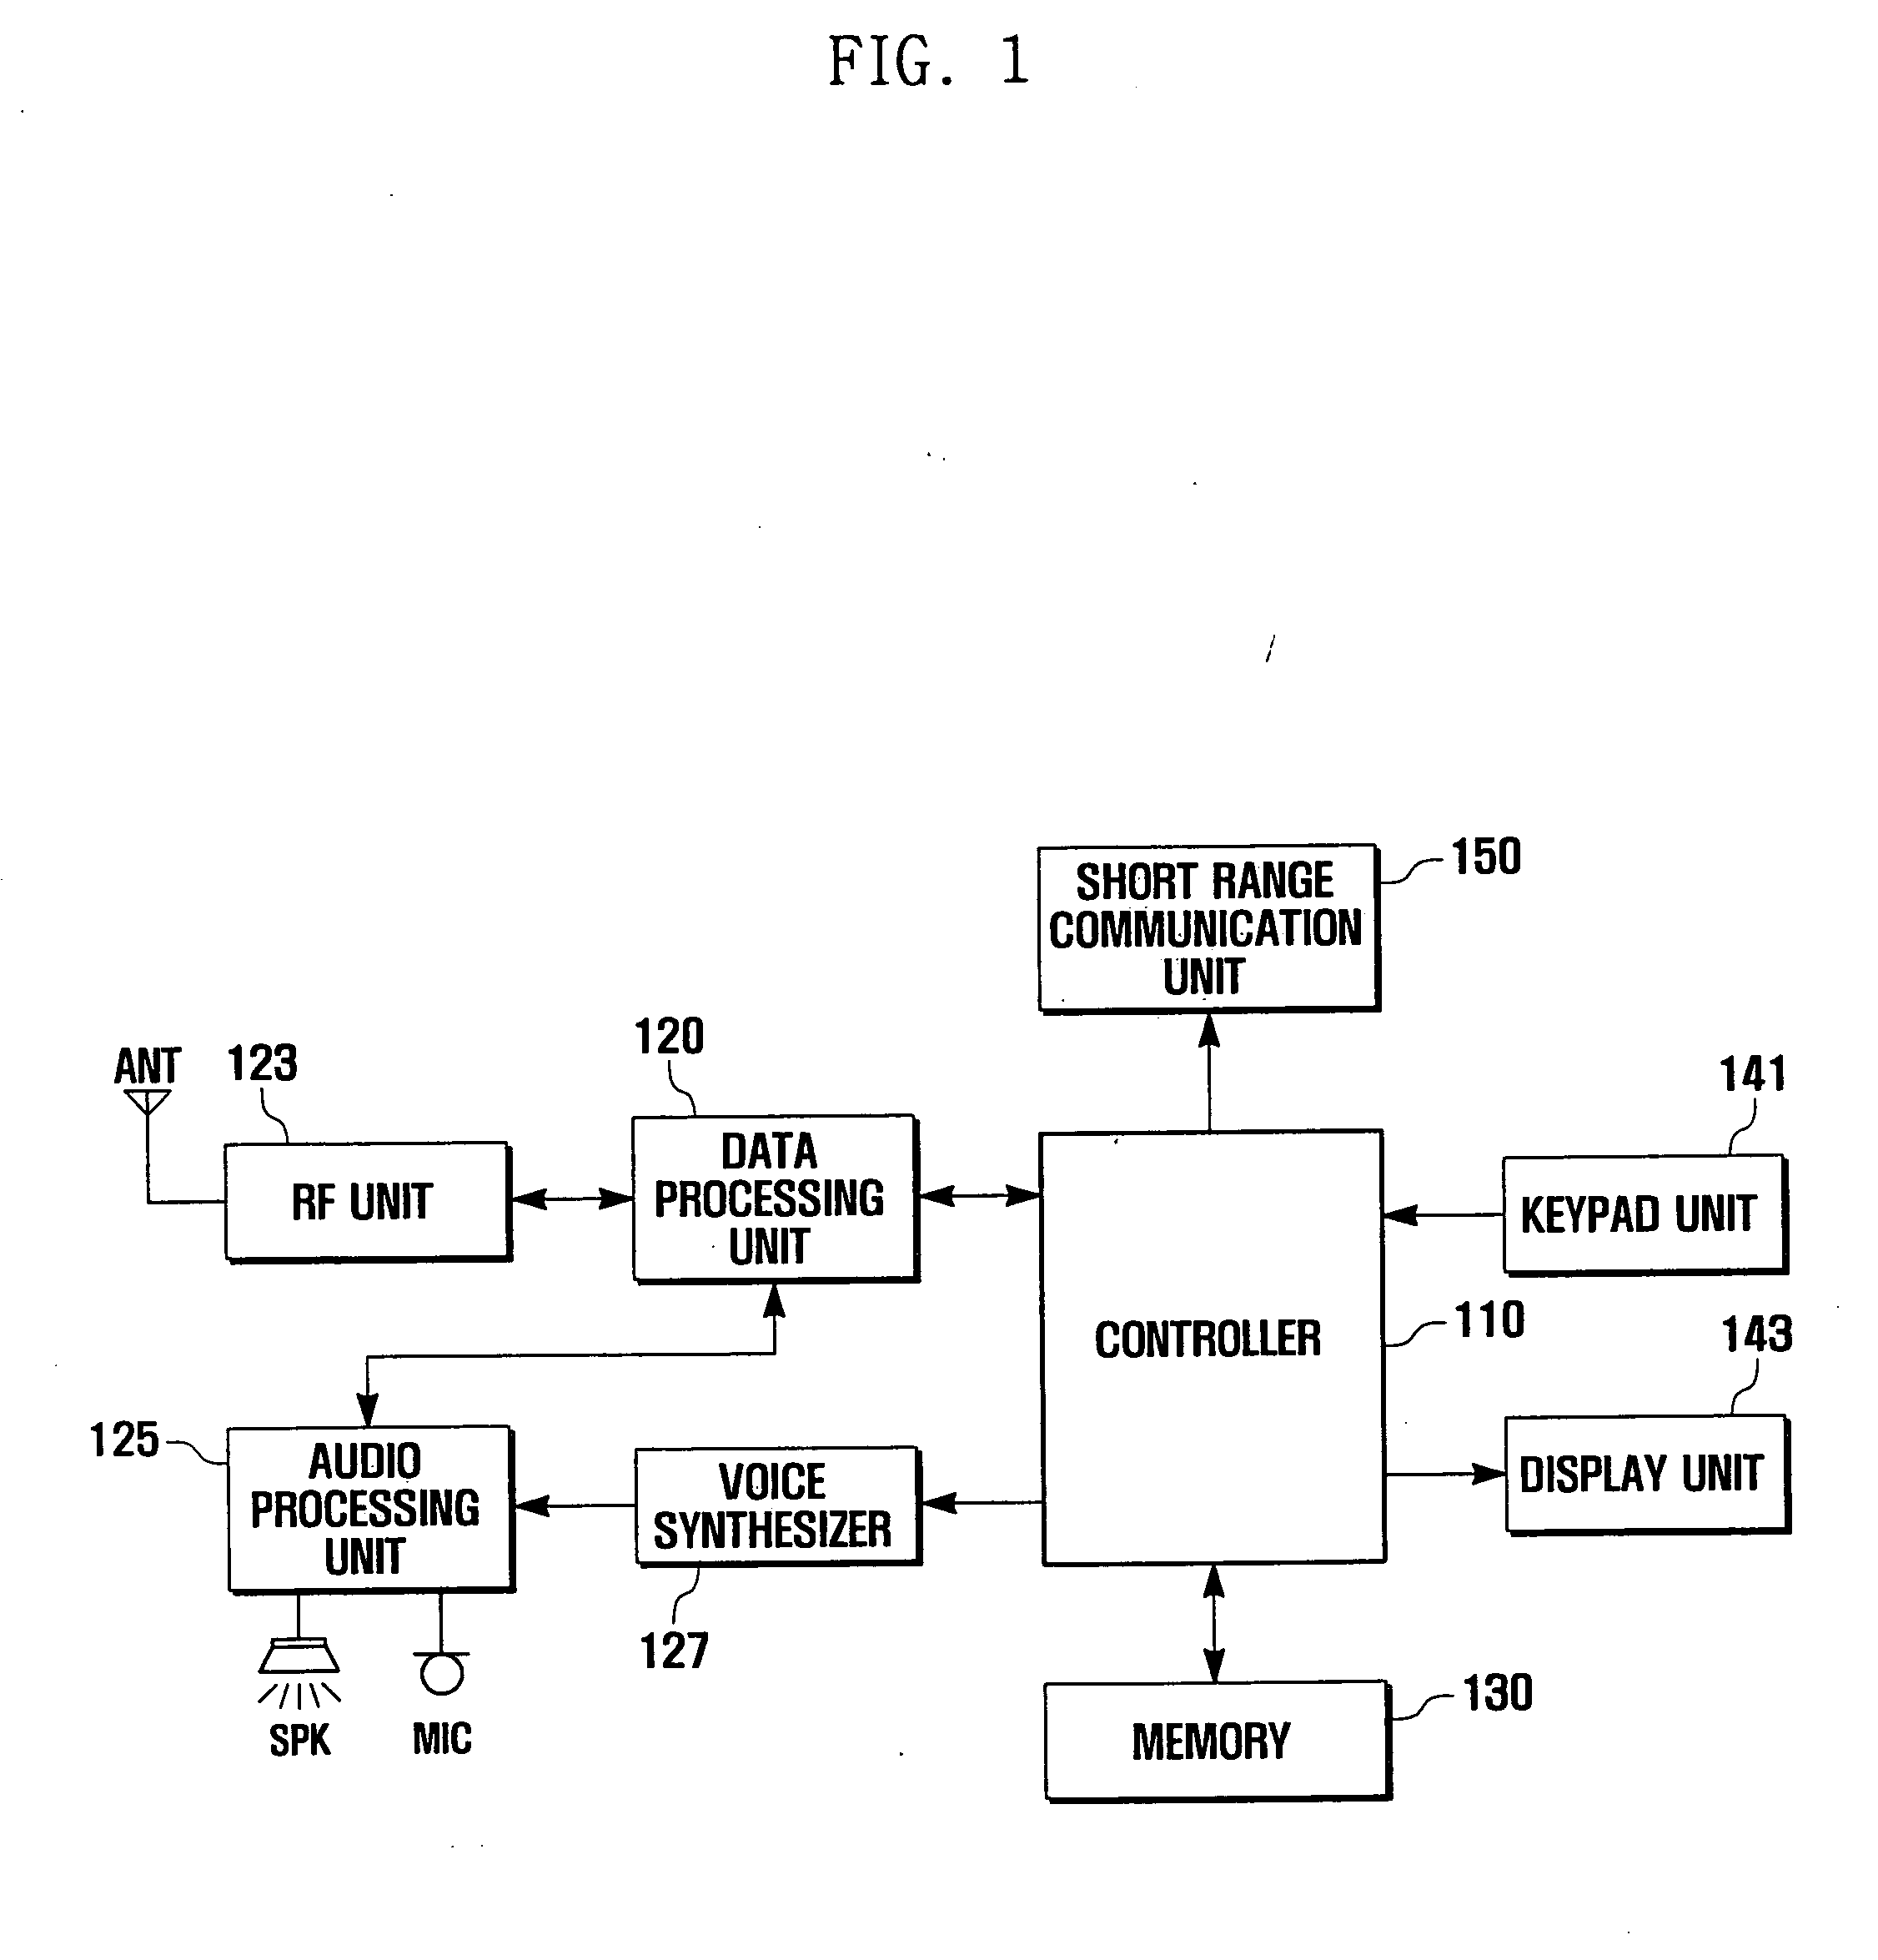 Screen image presentation apparatus and method for mobile phone